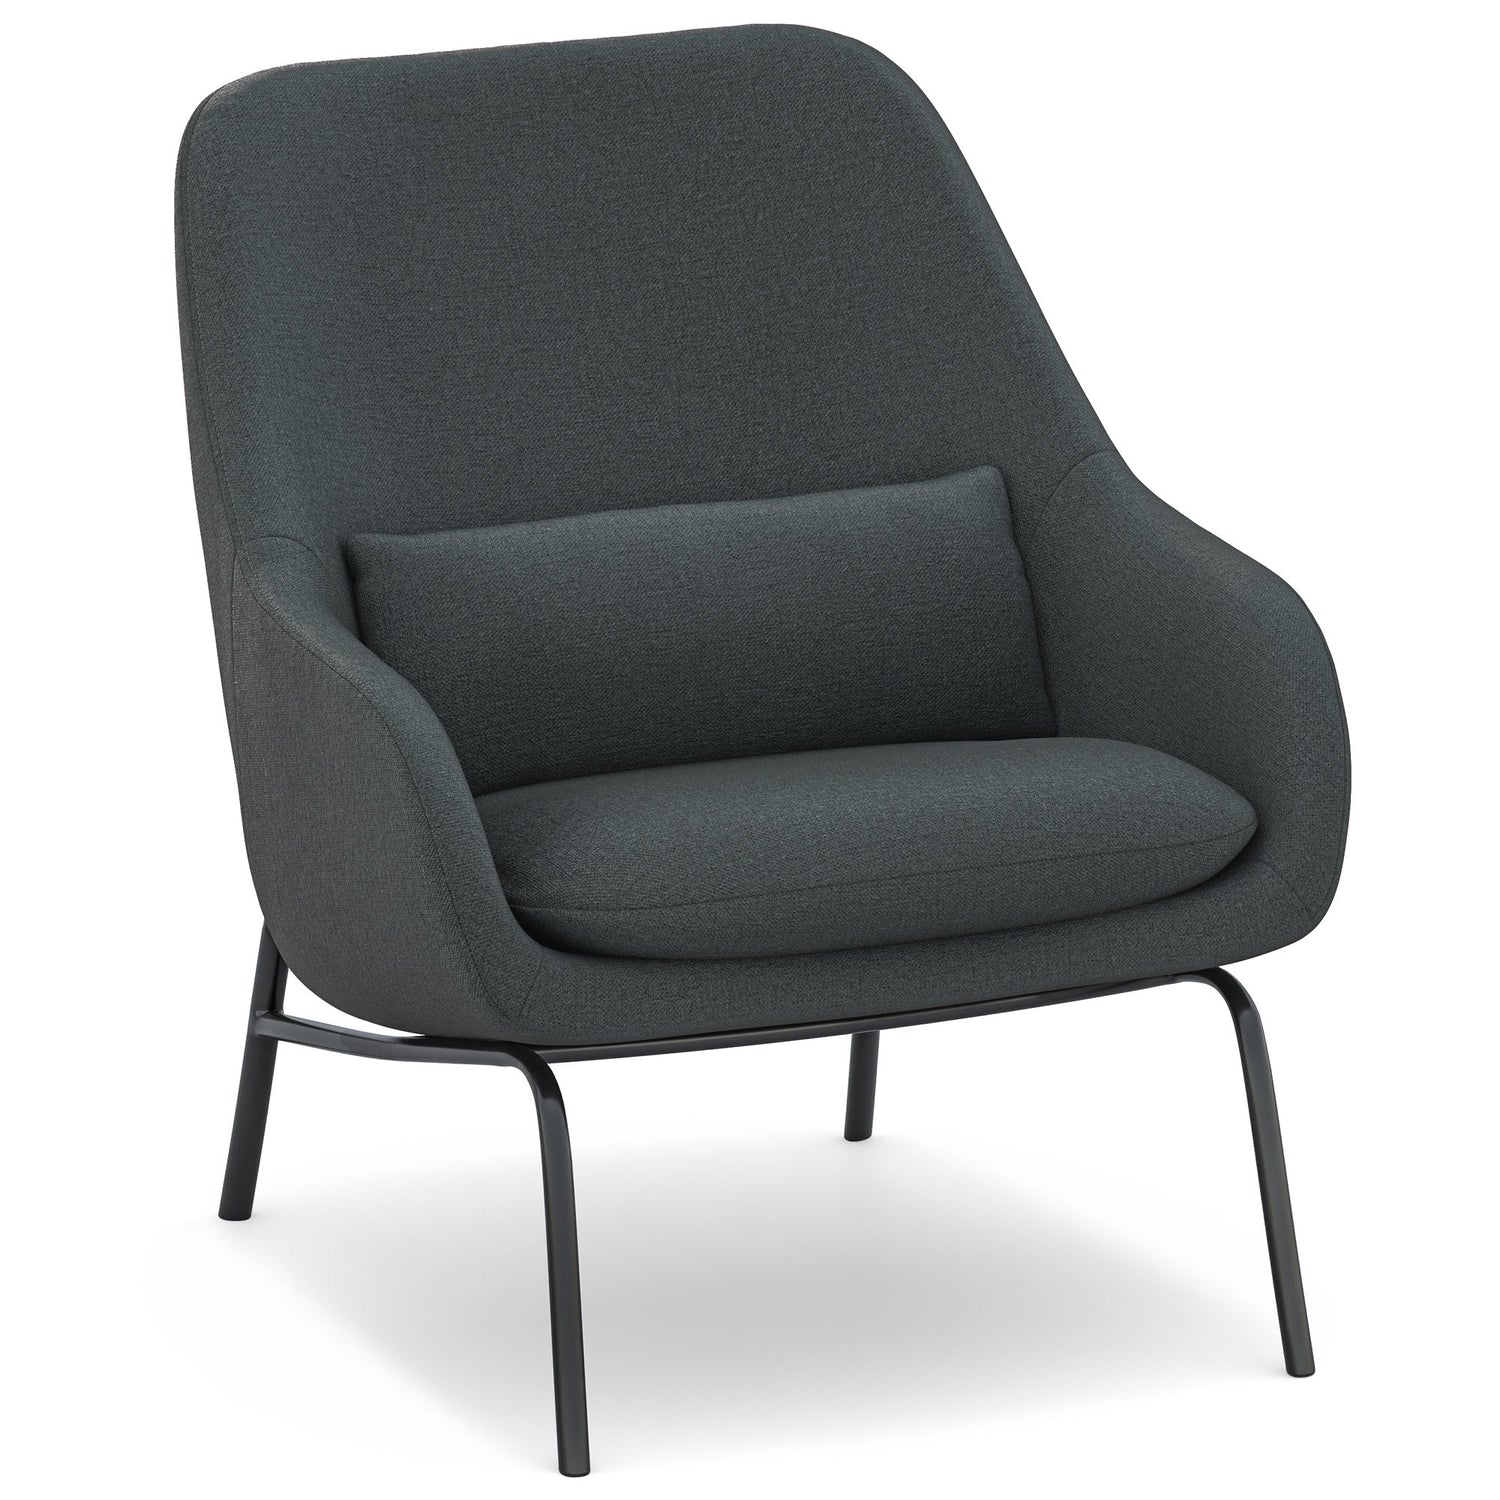 Steel Grey Woven Fabric | Elmont Accent Chair